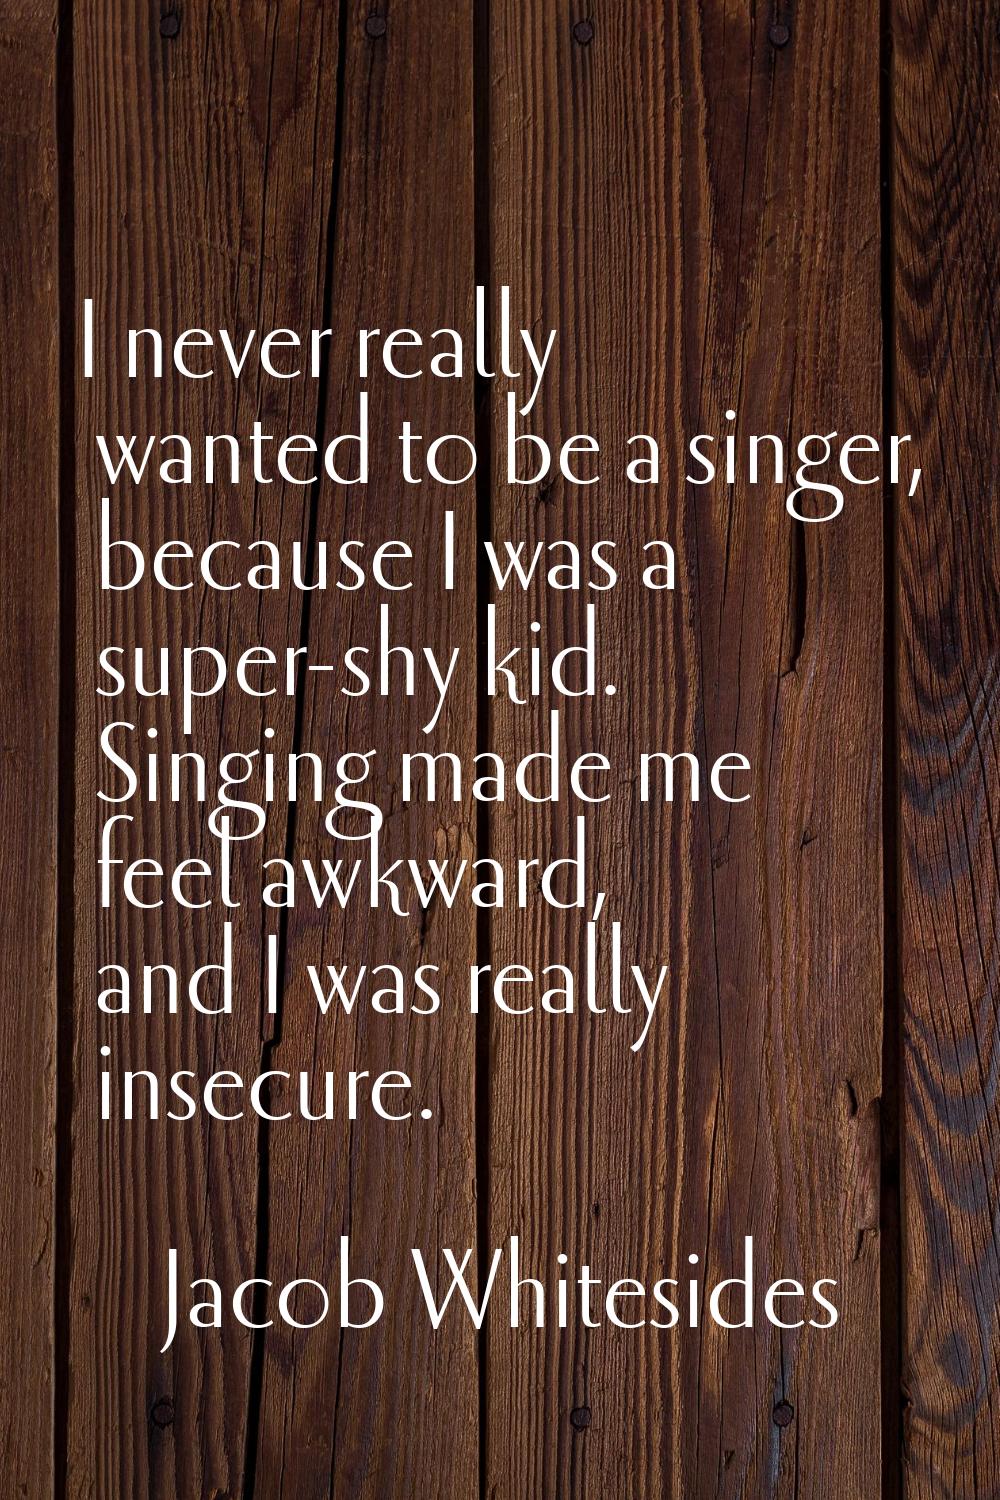 I never really wanted to be a singer, because I was a super-shy kid. Singing made me feel awkward, 